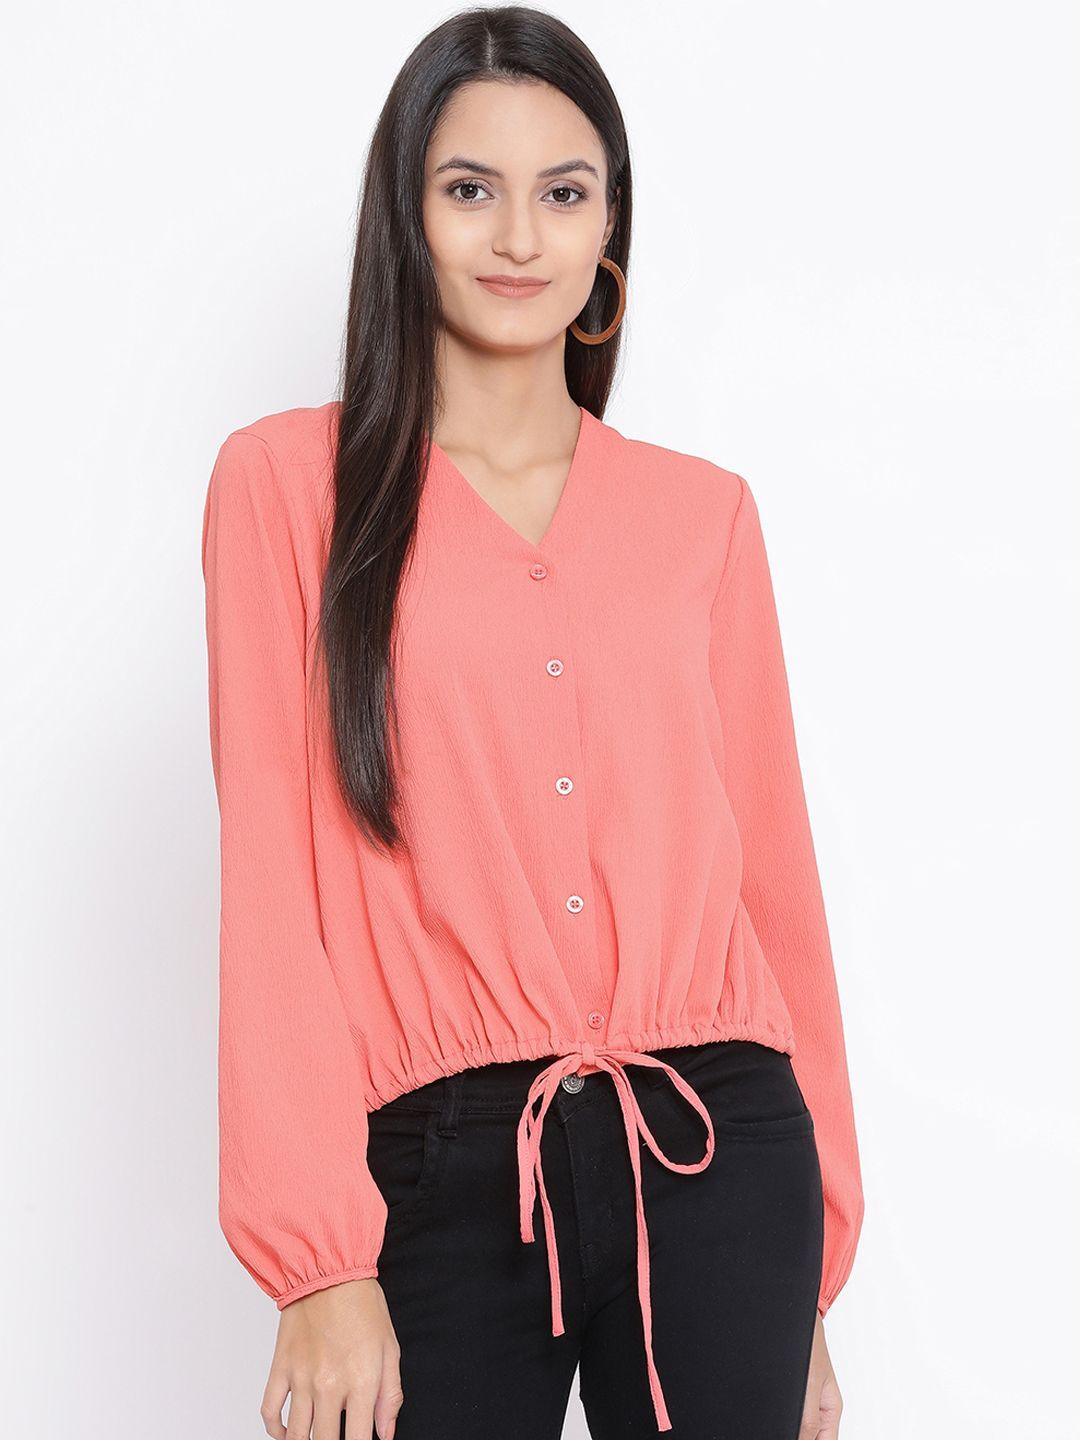 oxolloxo-women-coral-pink-solid-blouson-top